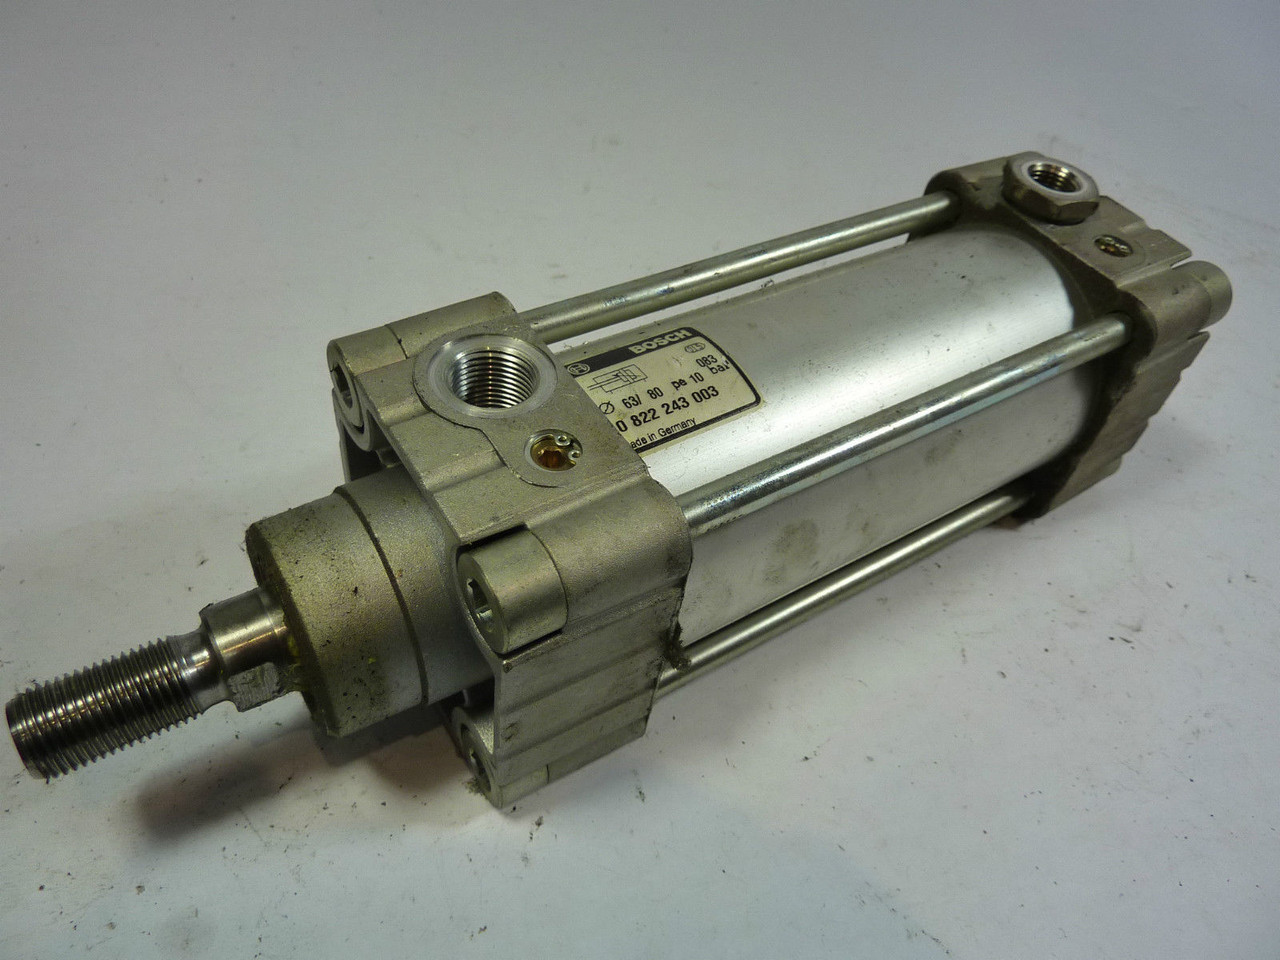 Bosch 0-822-243-003 Pneumatic Cylinder Actuator USED